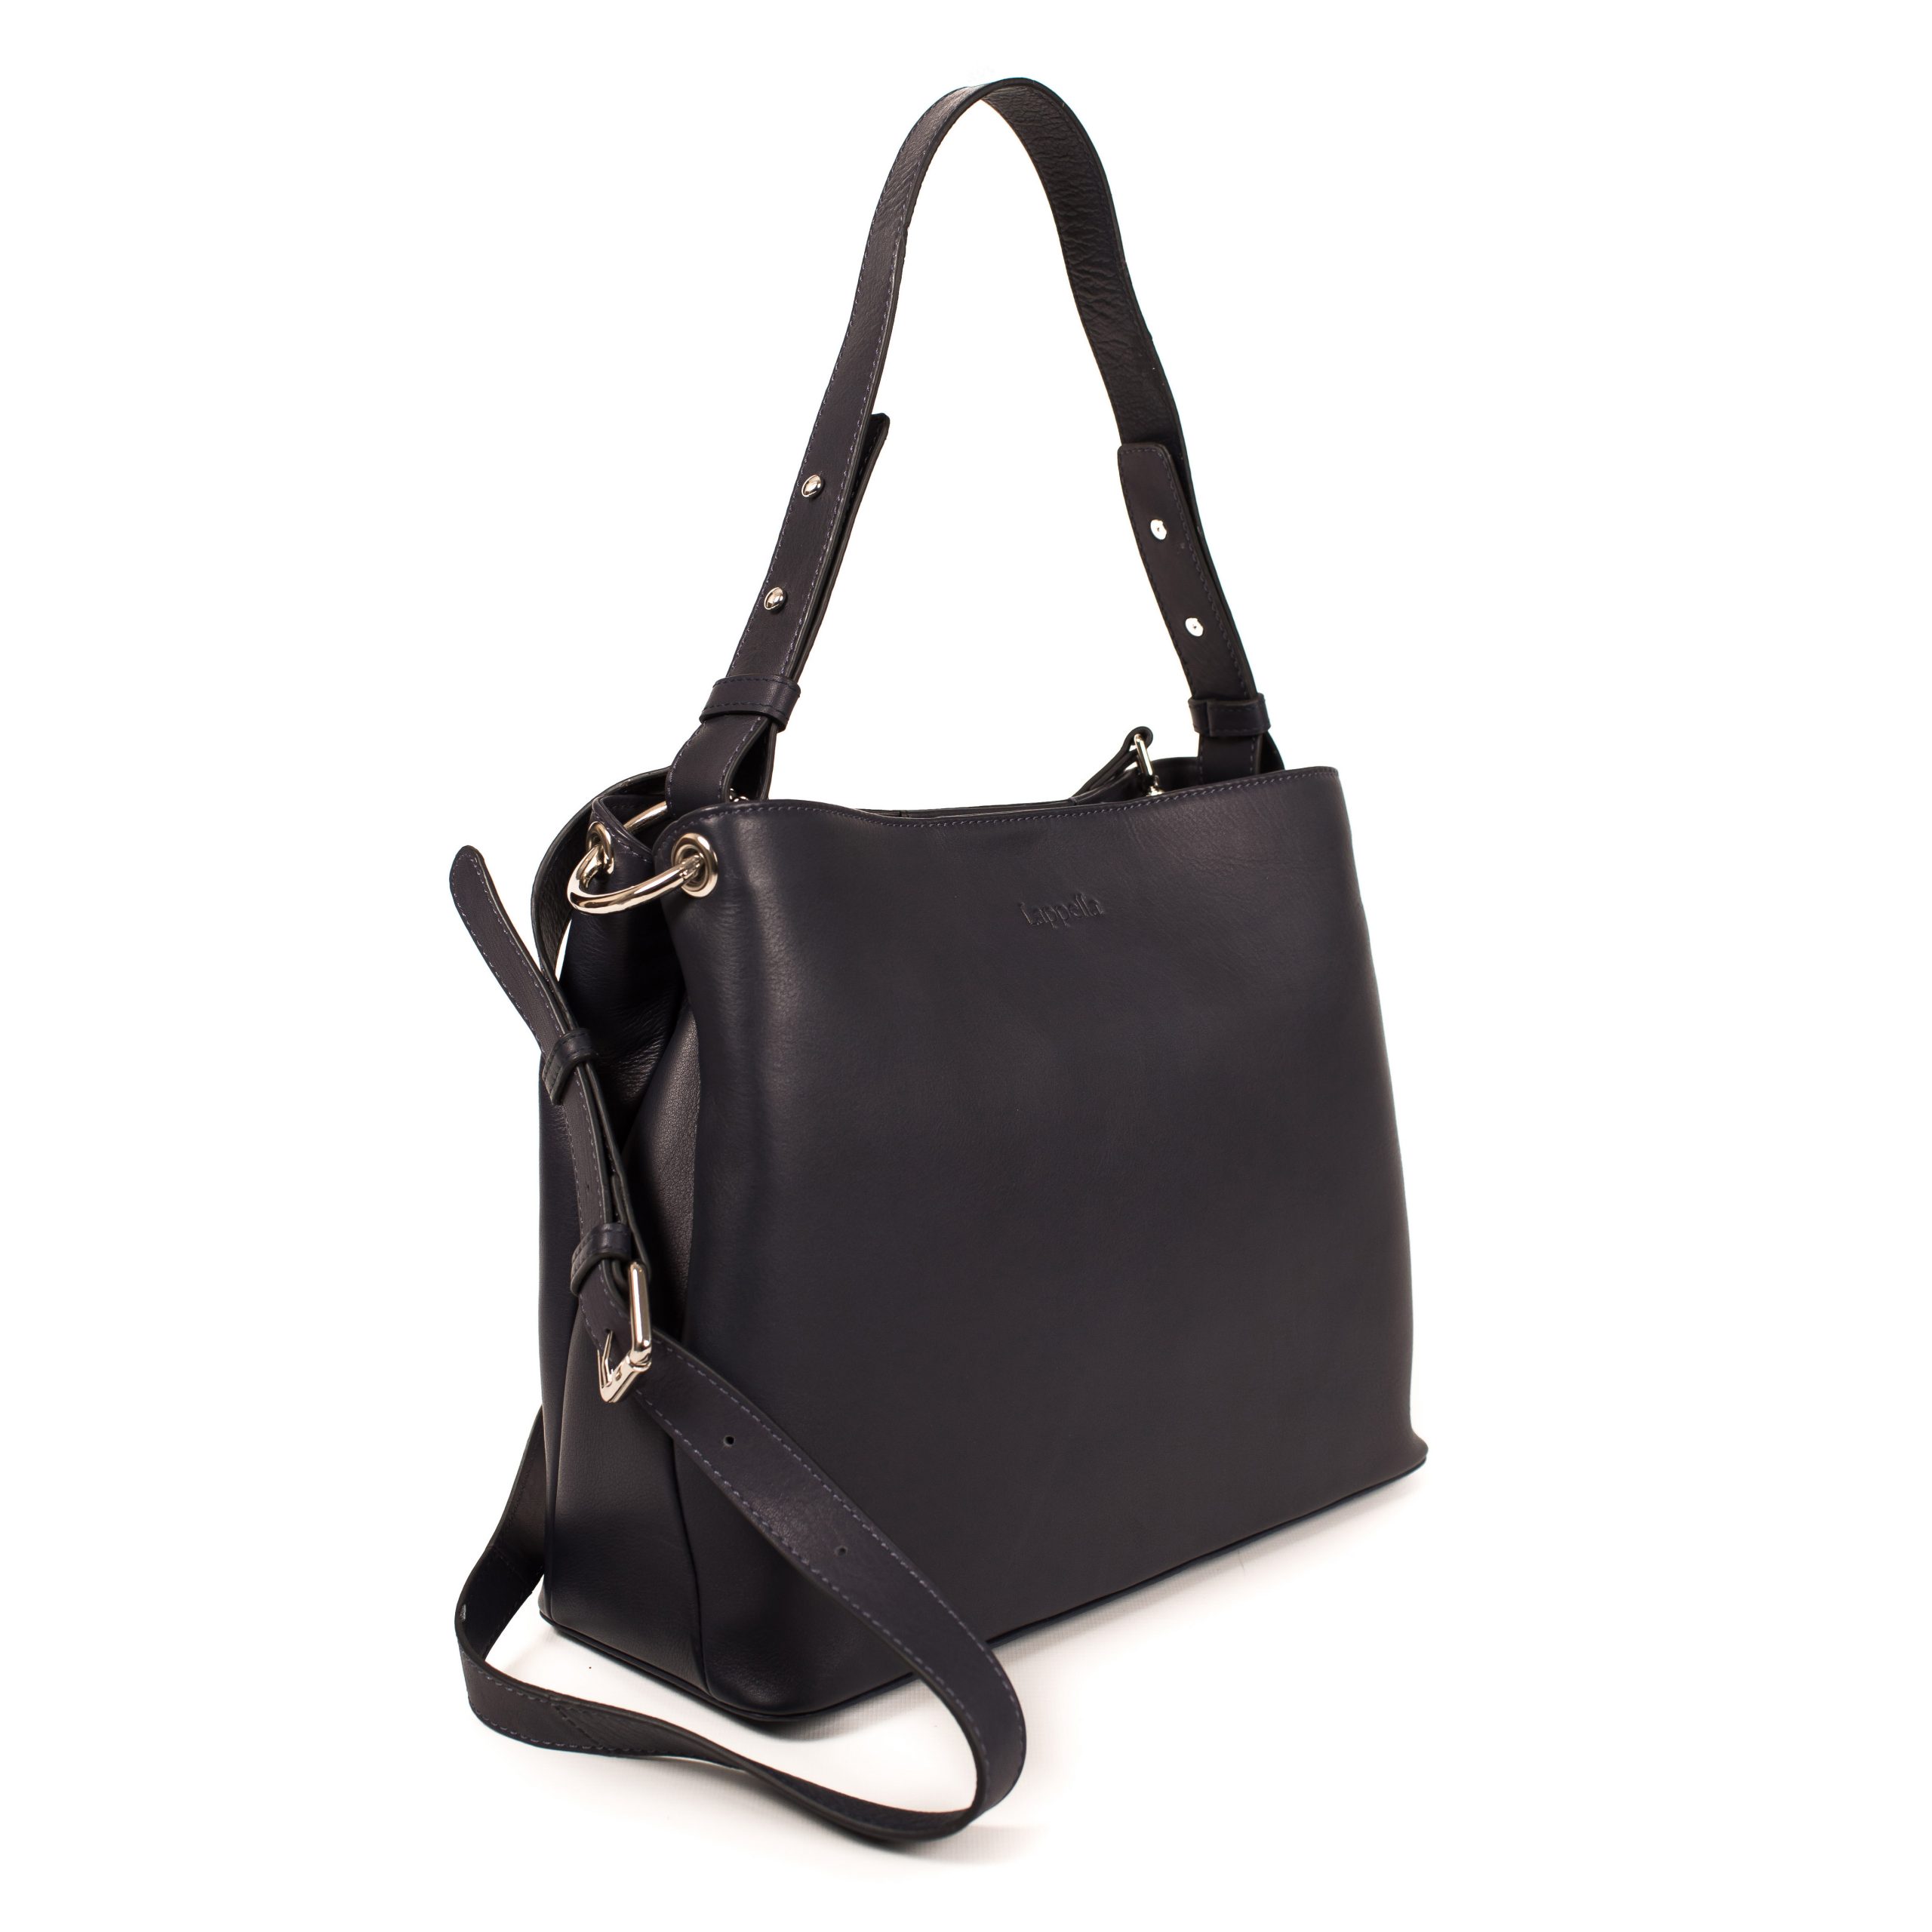 SARAH Leather Hobo Bag - Soft Leather by Lappella